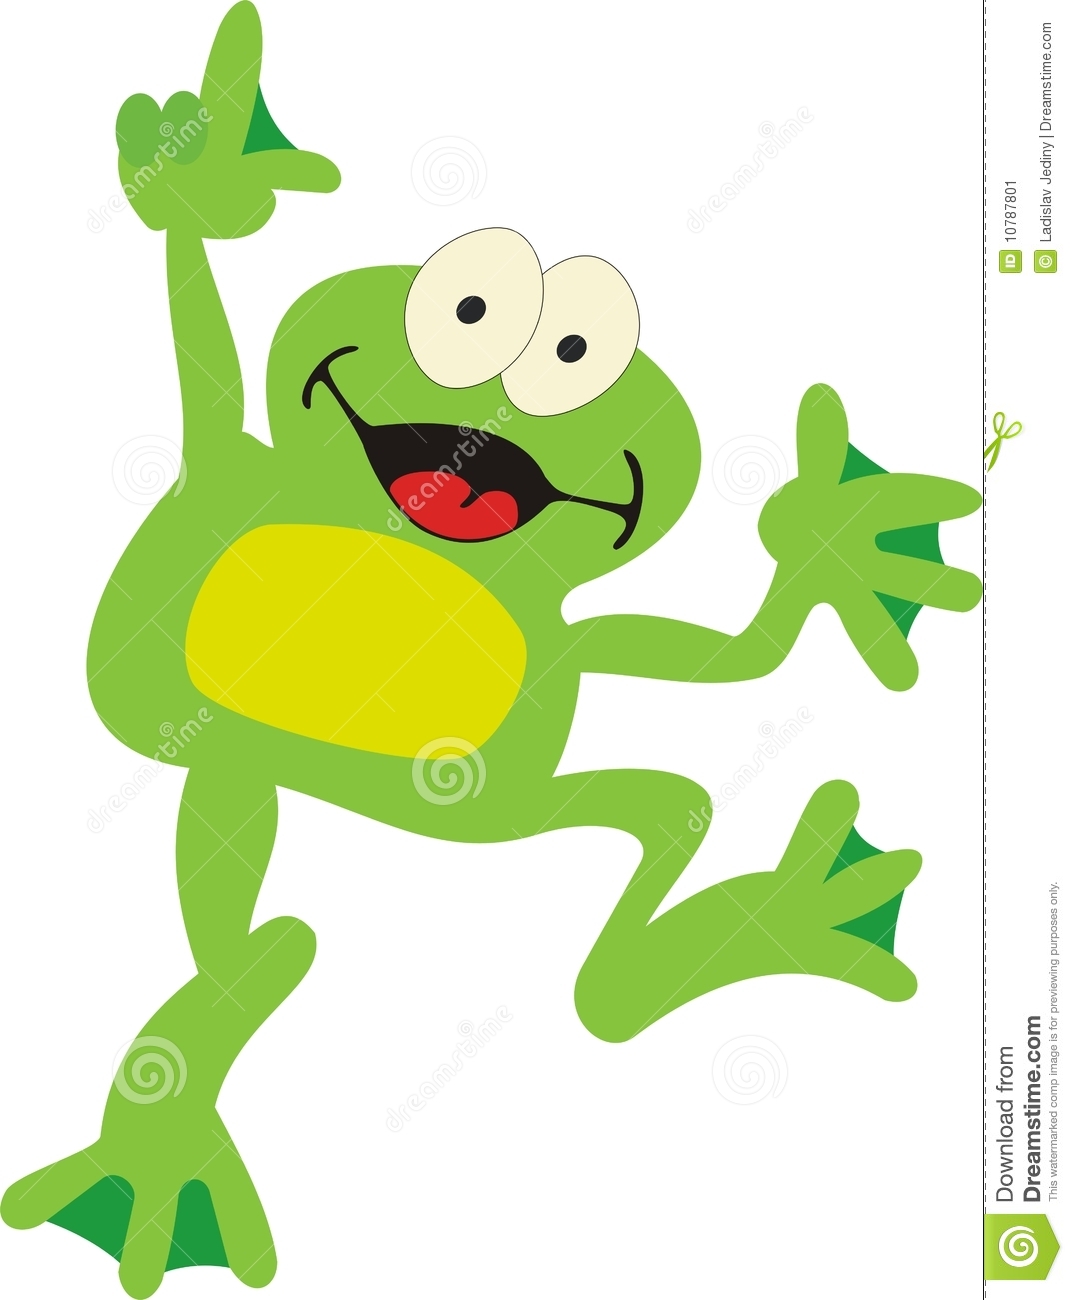 Cute Frog Clipart   Clipart Panda   Free Clipart Images